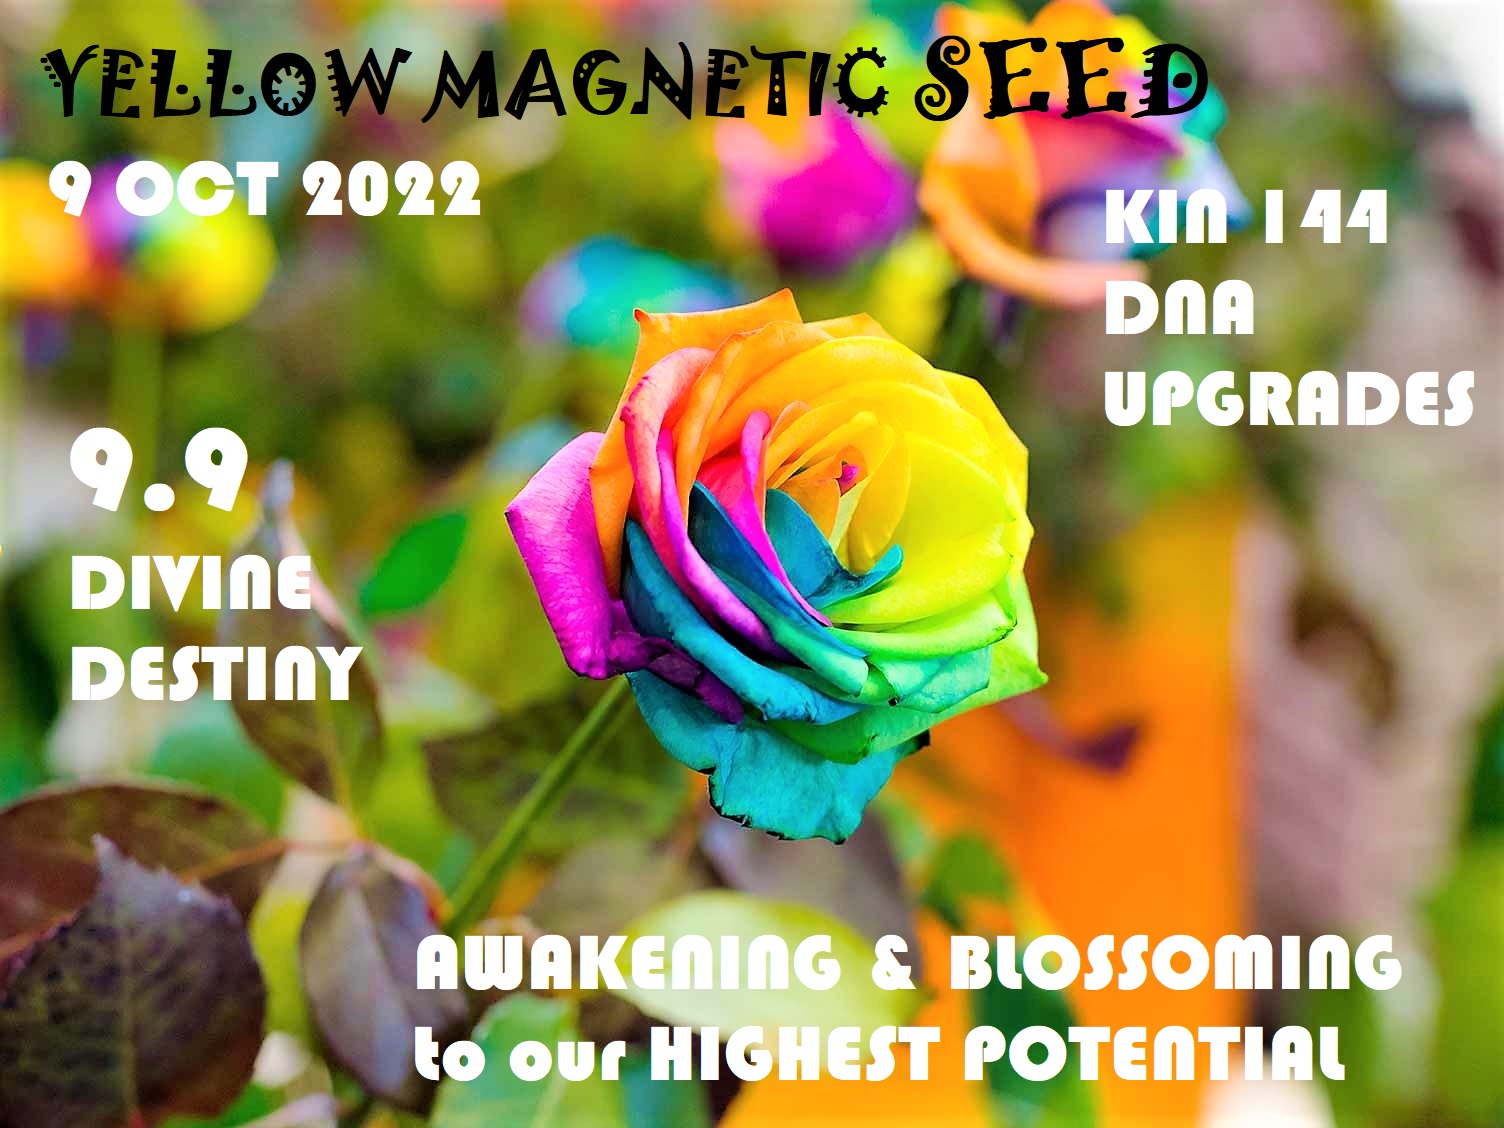 YELLOW MAGNETIC SEED